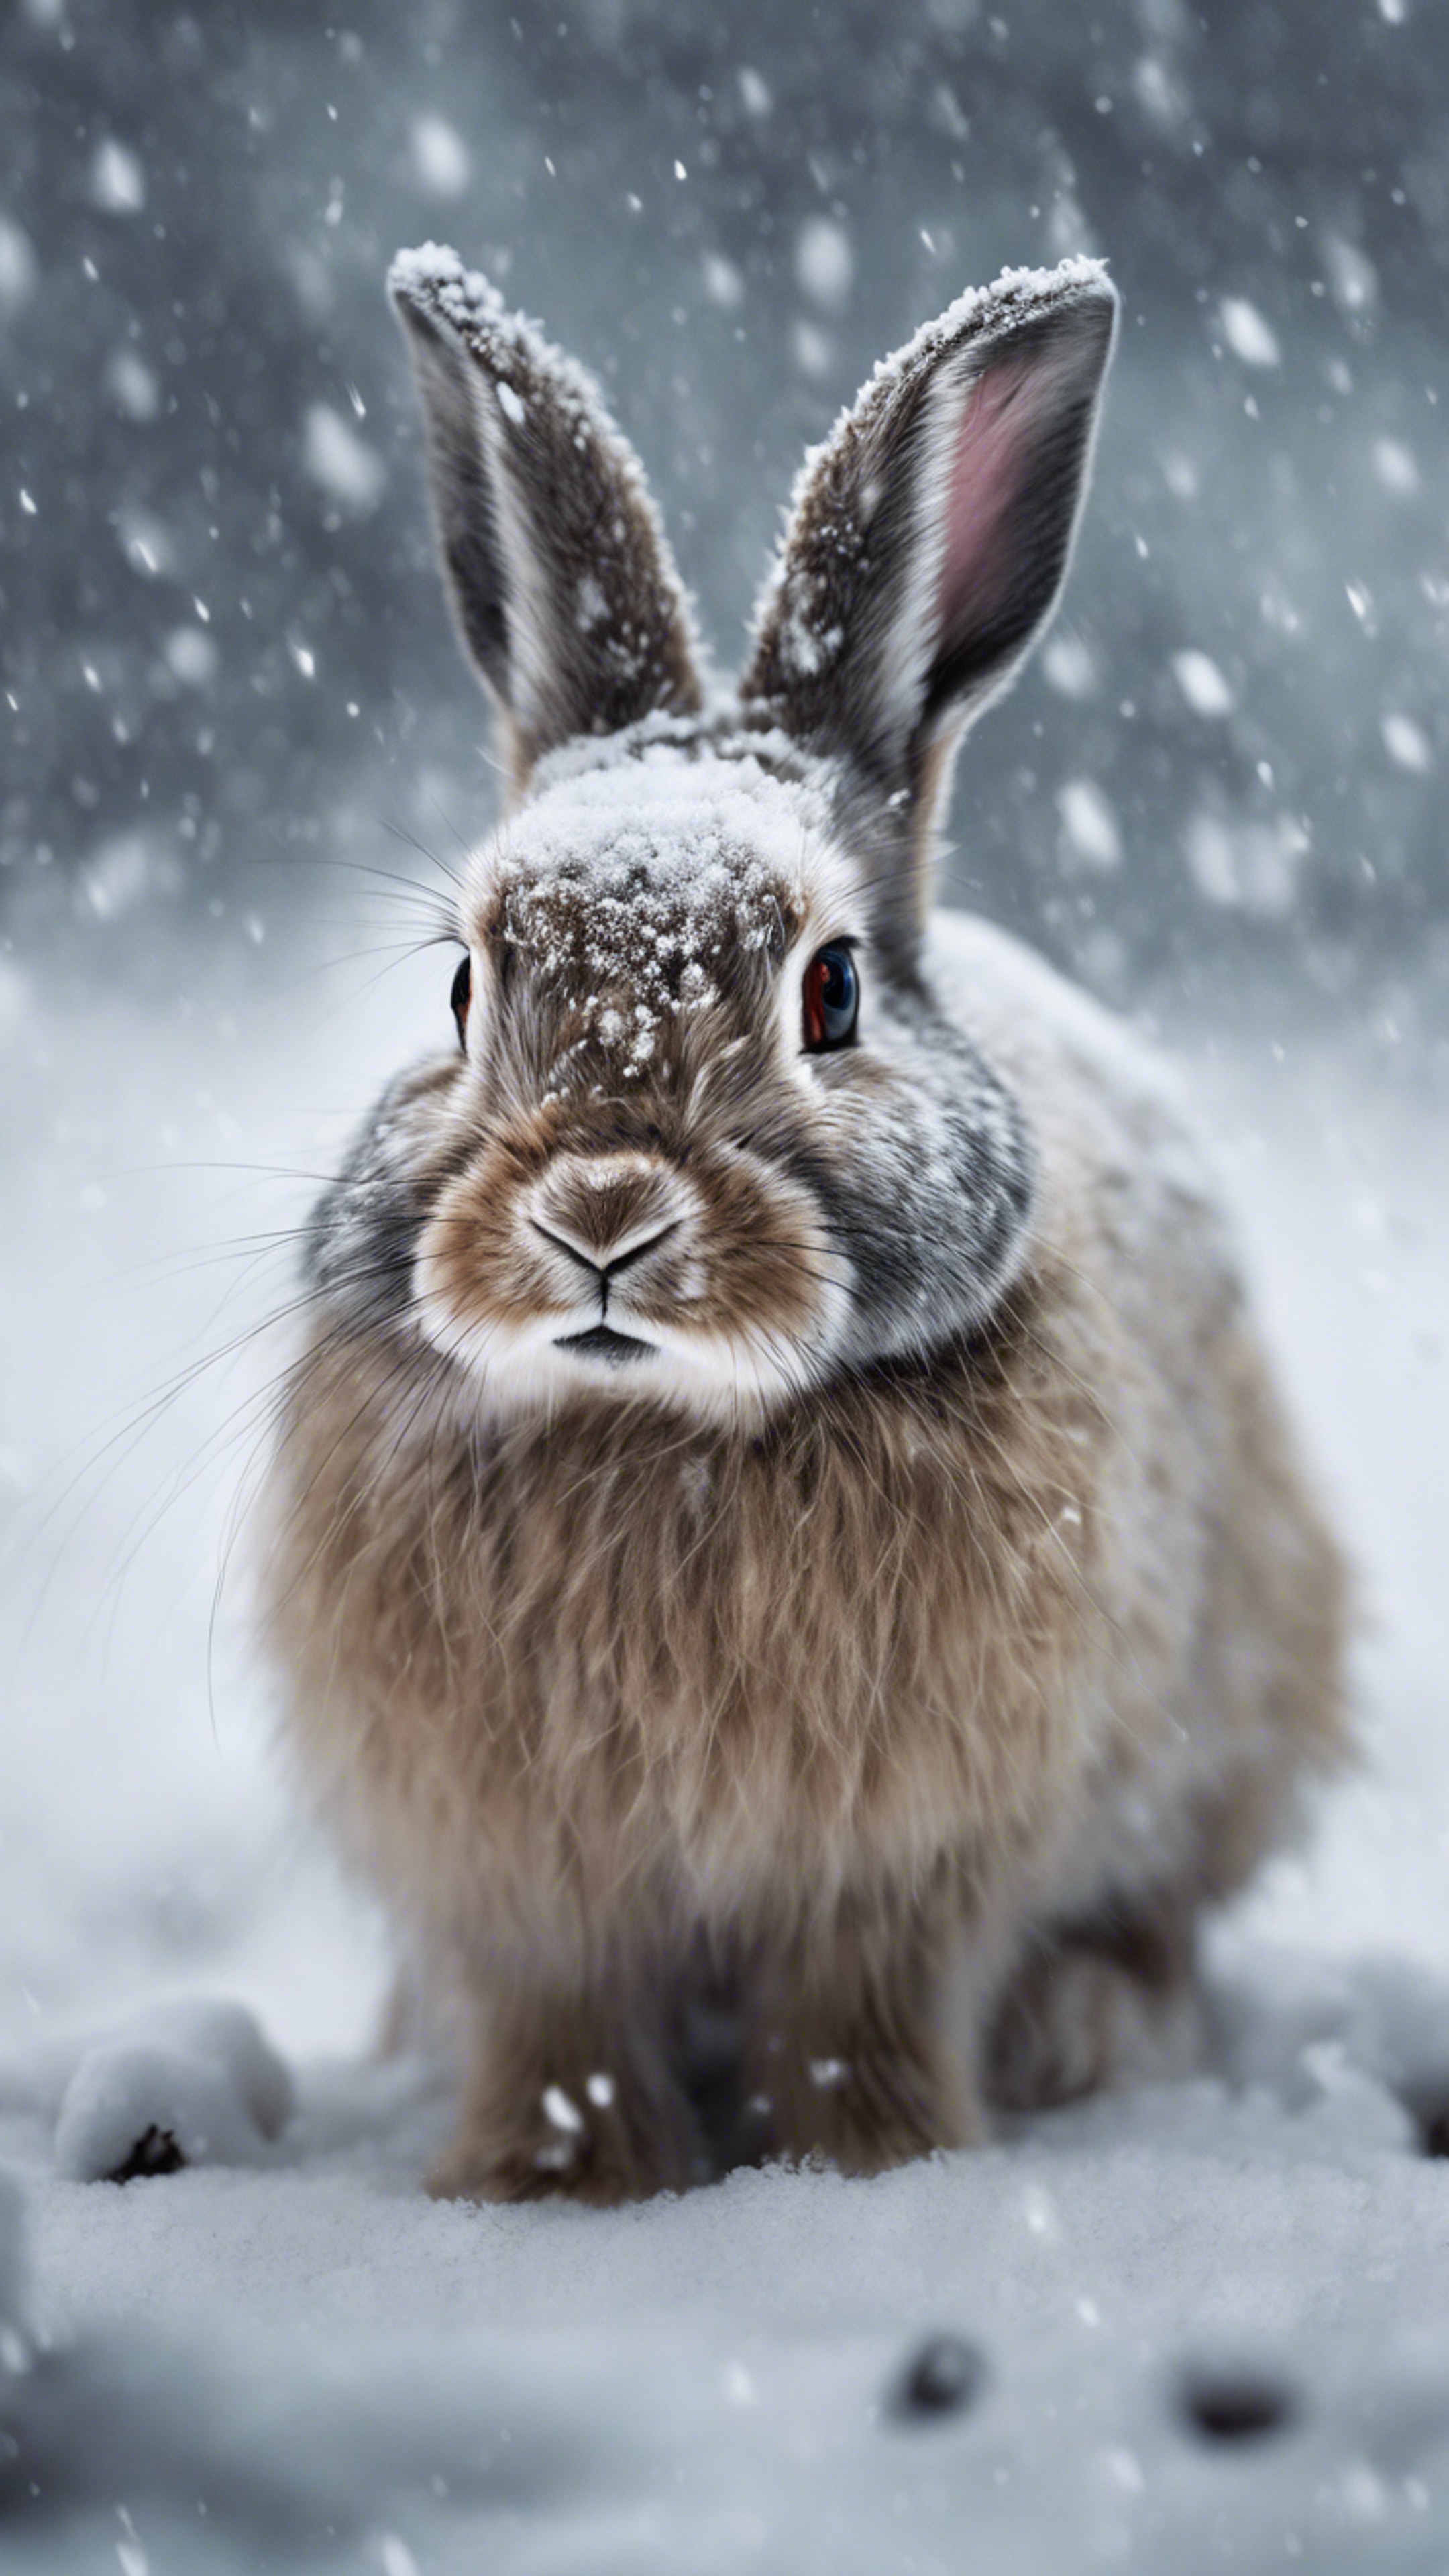 An Arctic rabbit braving a blizzard, its fur blending in with the snow. Валлпапер[f8597e39ec4d4470ac43]